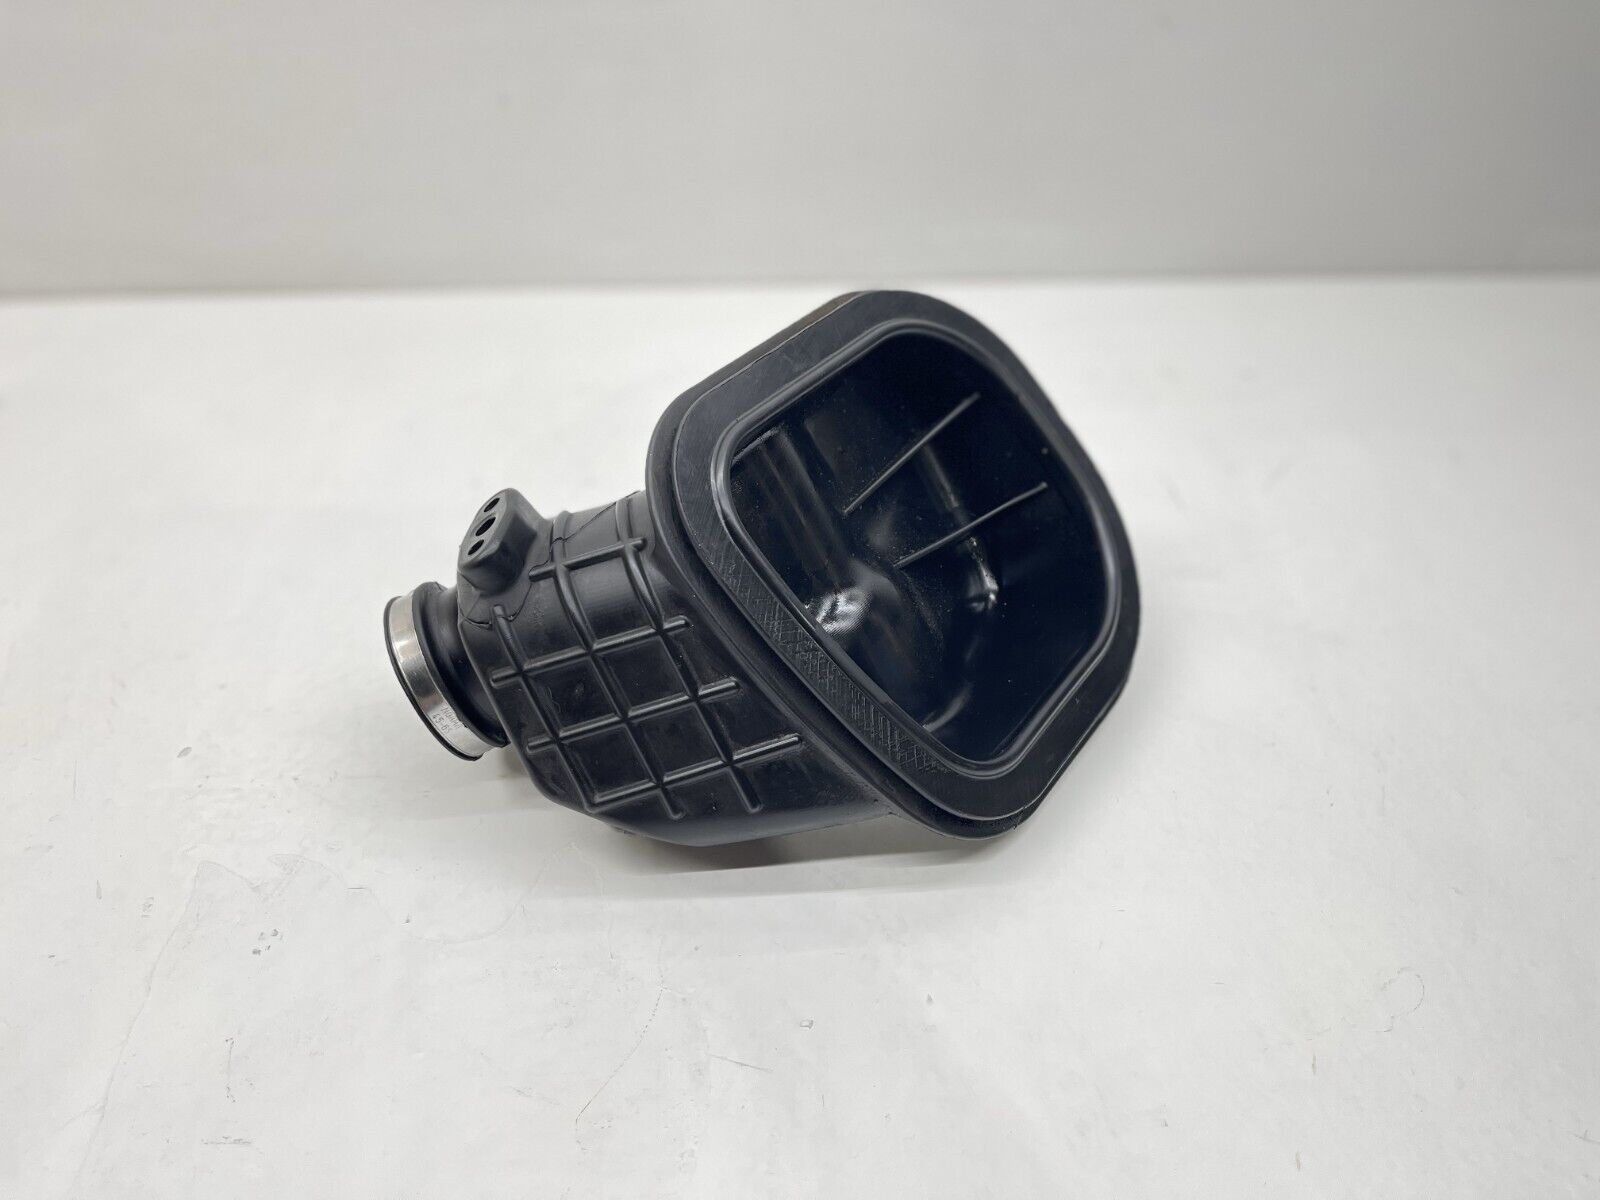 2015 Husqvarna FC450 Air Boot Filter Intake Airboot Cage Clamp Duct Rubber Black